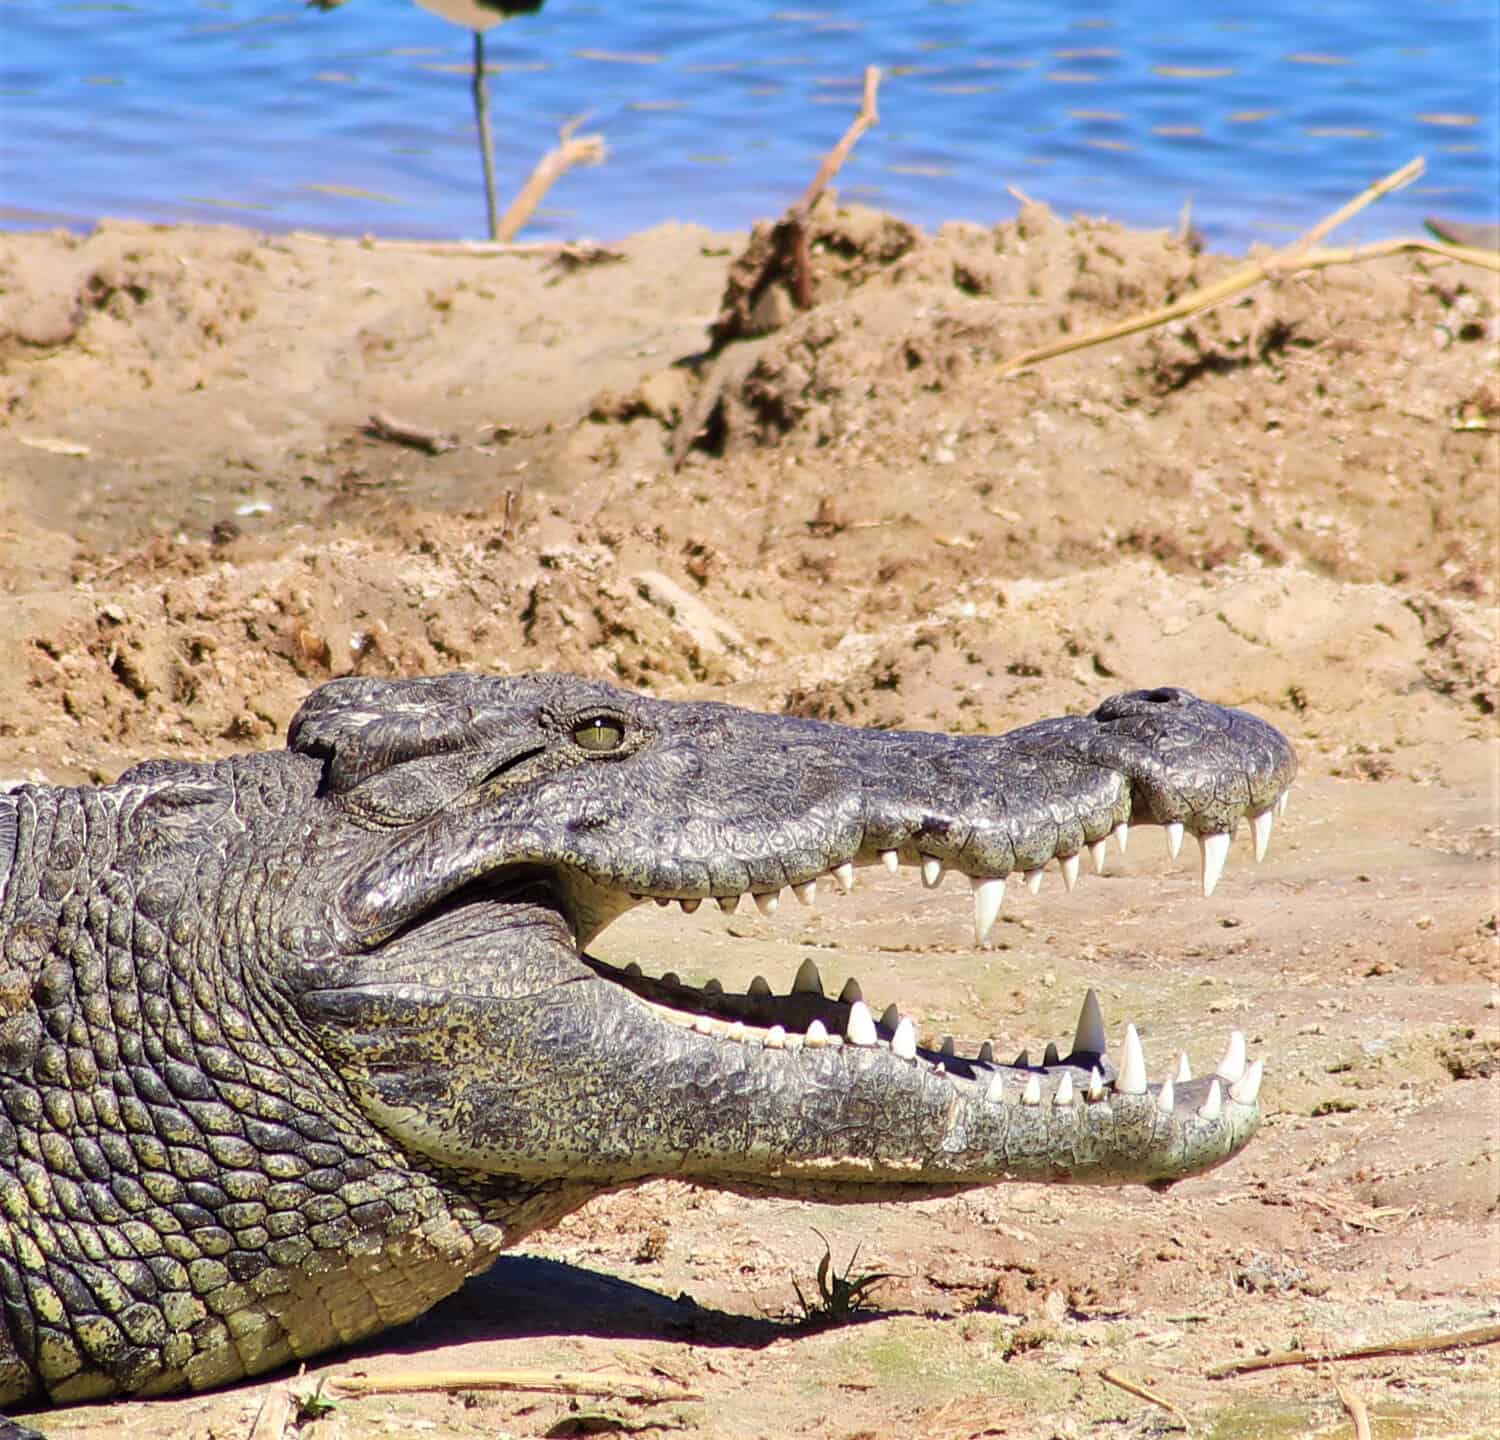 A crocodile resting in the sun on a sandbank with his mouth open.A blacksmith plover stands in the background.Since crocodiles are coldblooded they love warming up by laying in the sun on sandbanks.